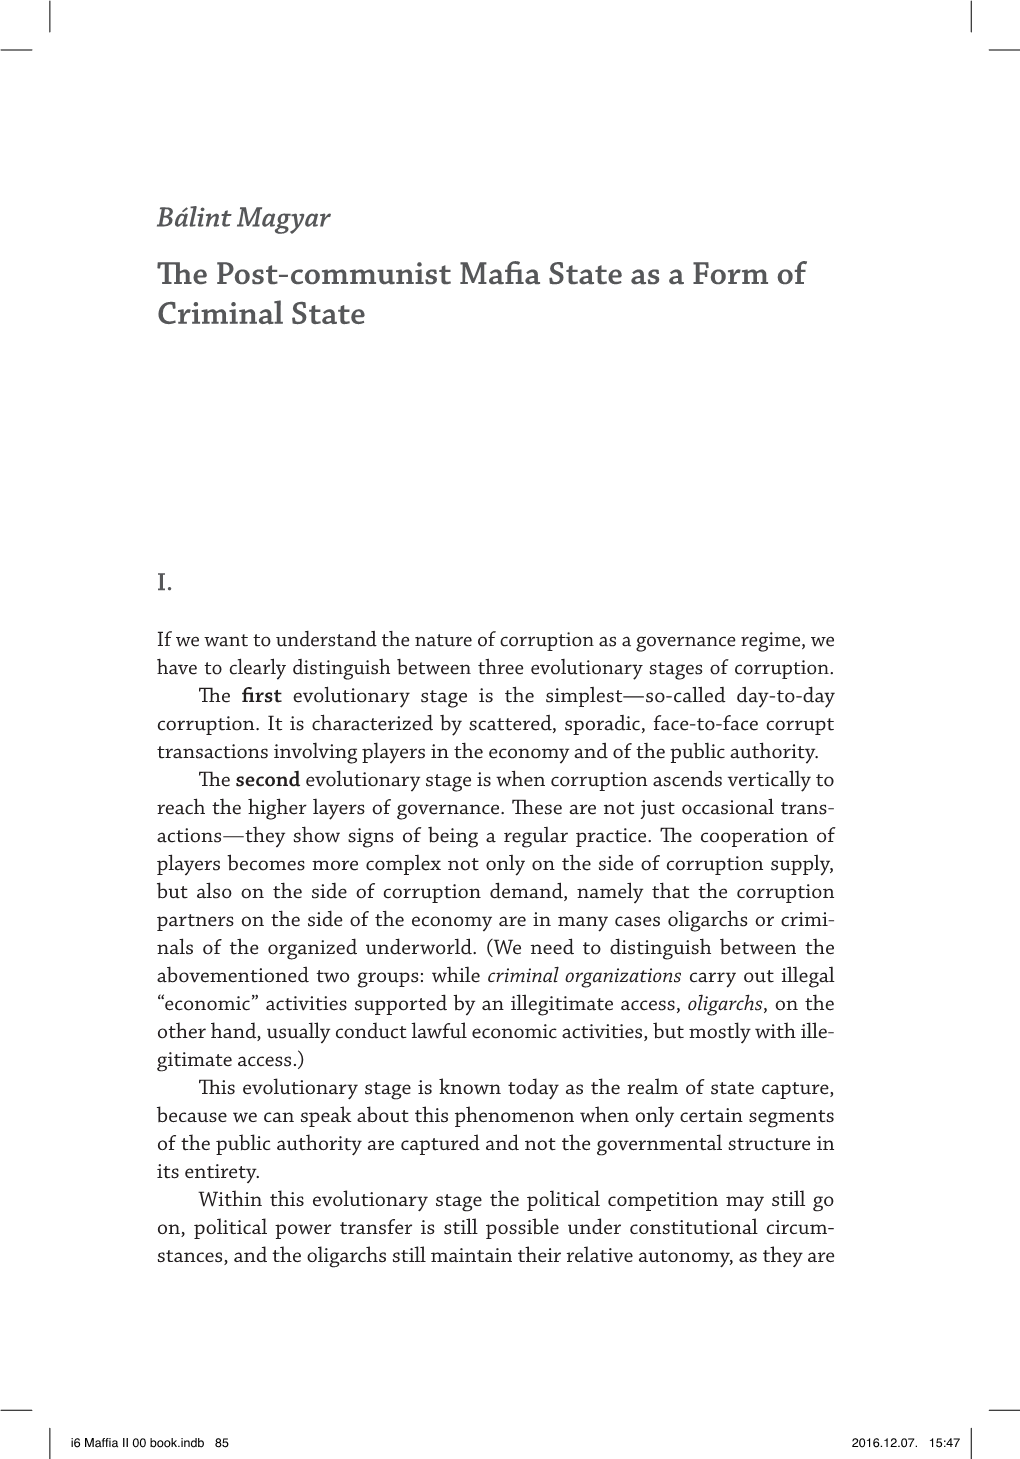 The Post-Communist Mafia State As a Form of Criminal State